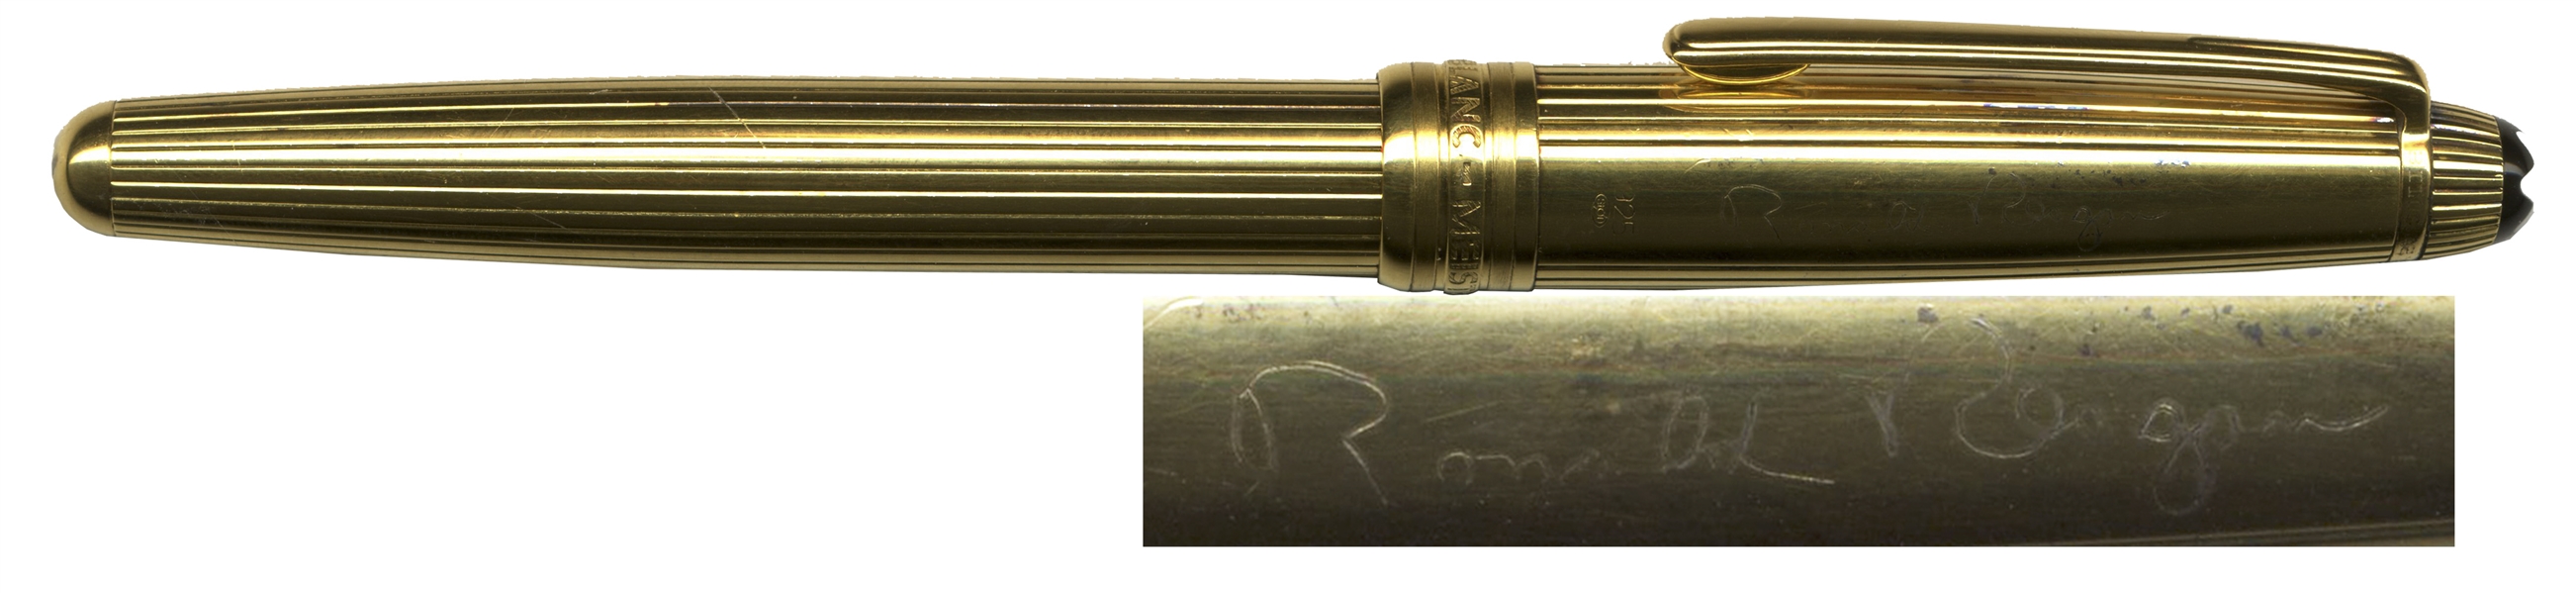 Ronald Reagan Pen Ronald Reagan Mont Blanc Meisterstuck Engraved Pen -- Personally Owned & Used by Ronald Reagan, The Great Communicator